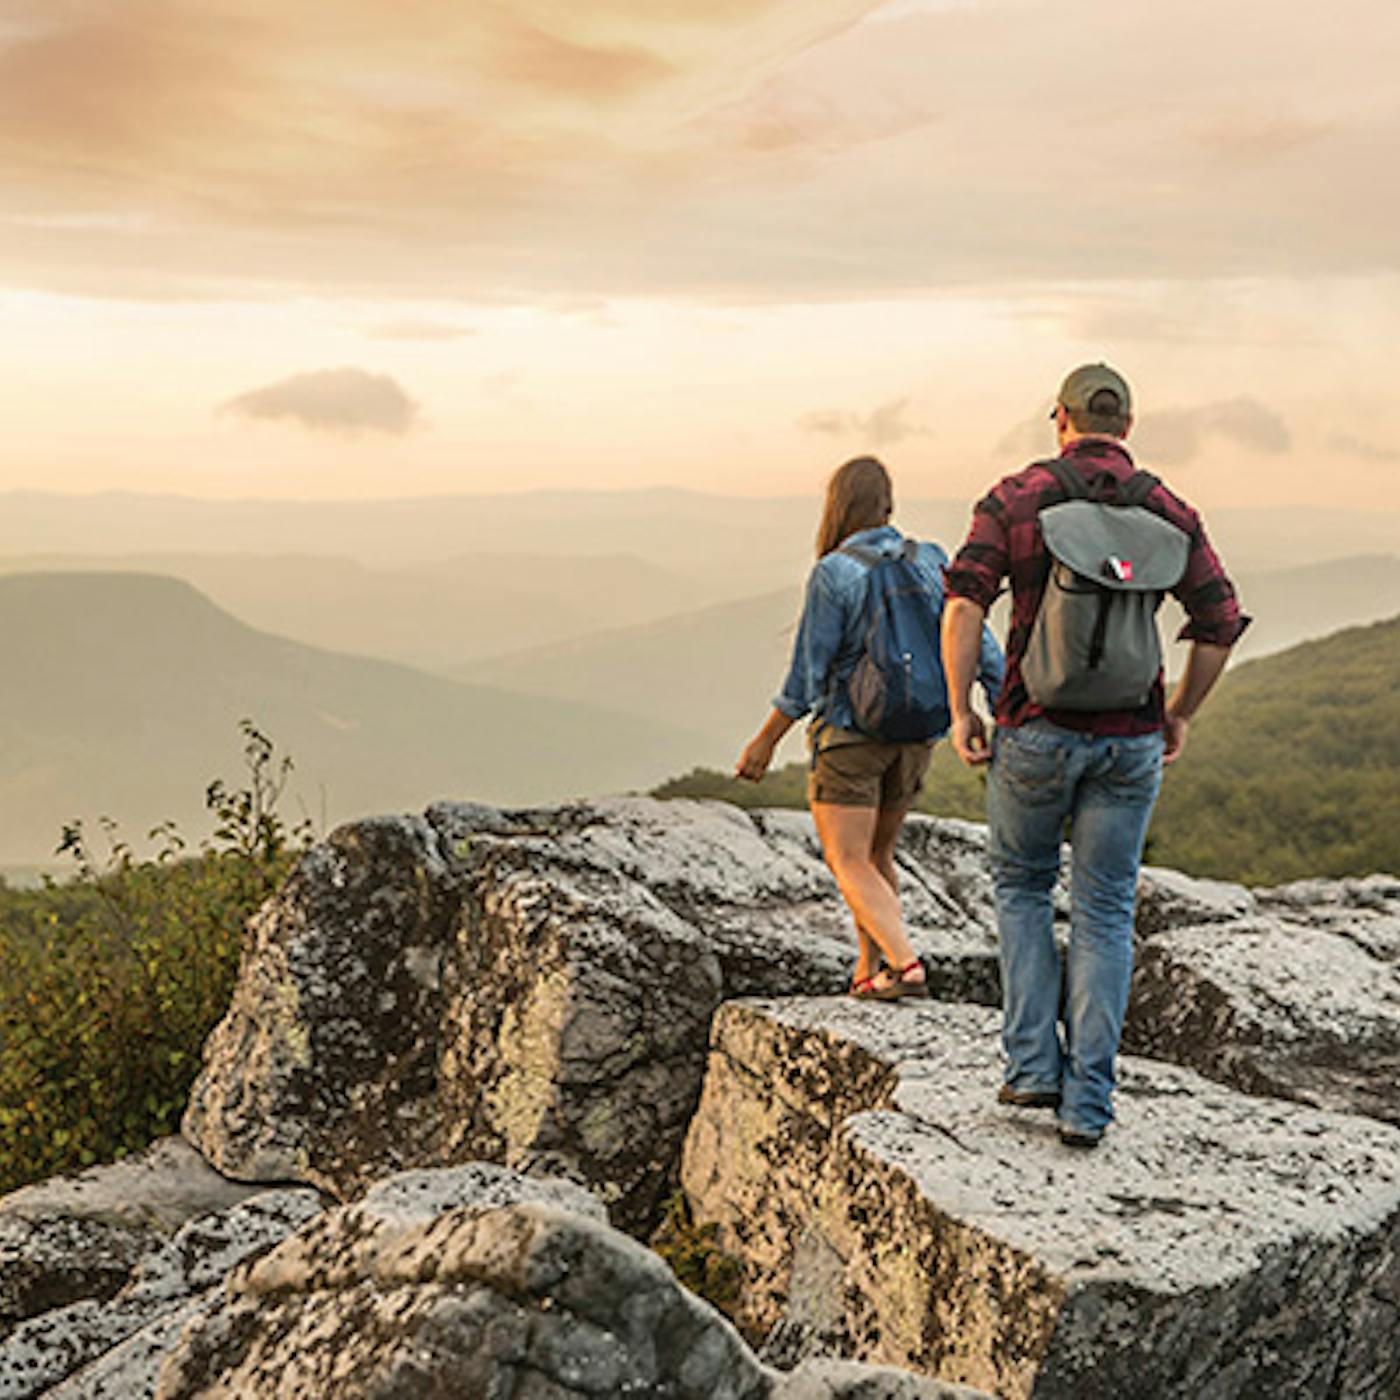 People hiking on rock overlooking mountains in Dolly Sods Wilderness in Davis, West Virginia (photo courtesy of West Virginia Department of Tourism))